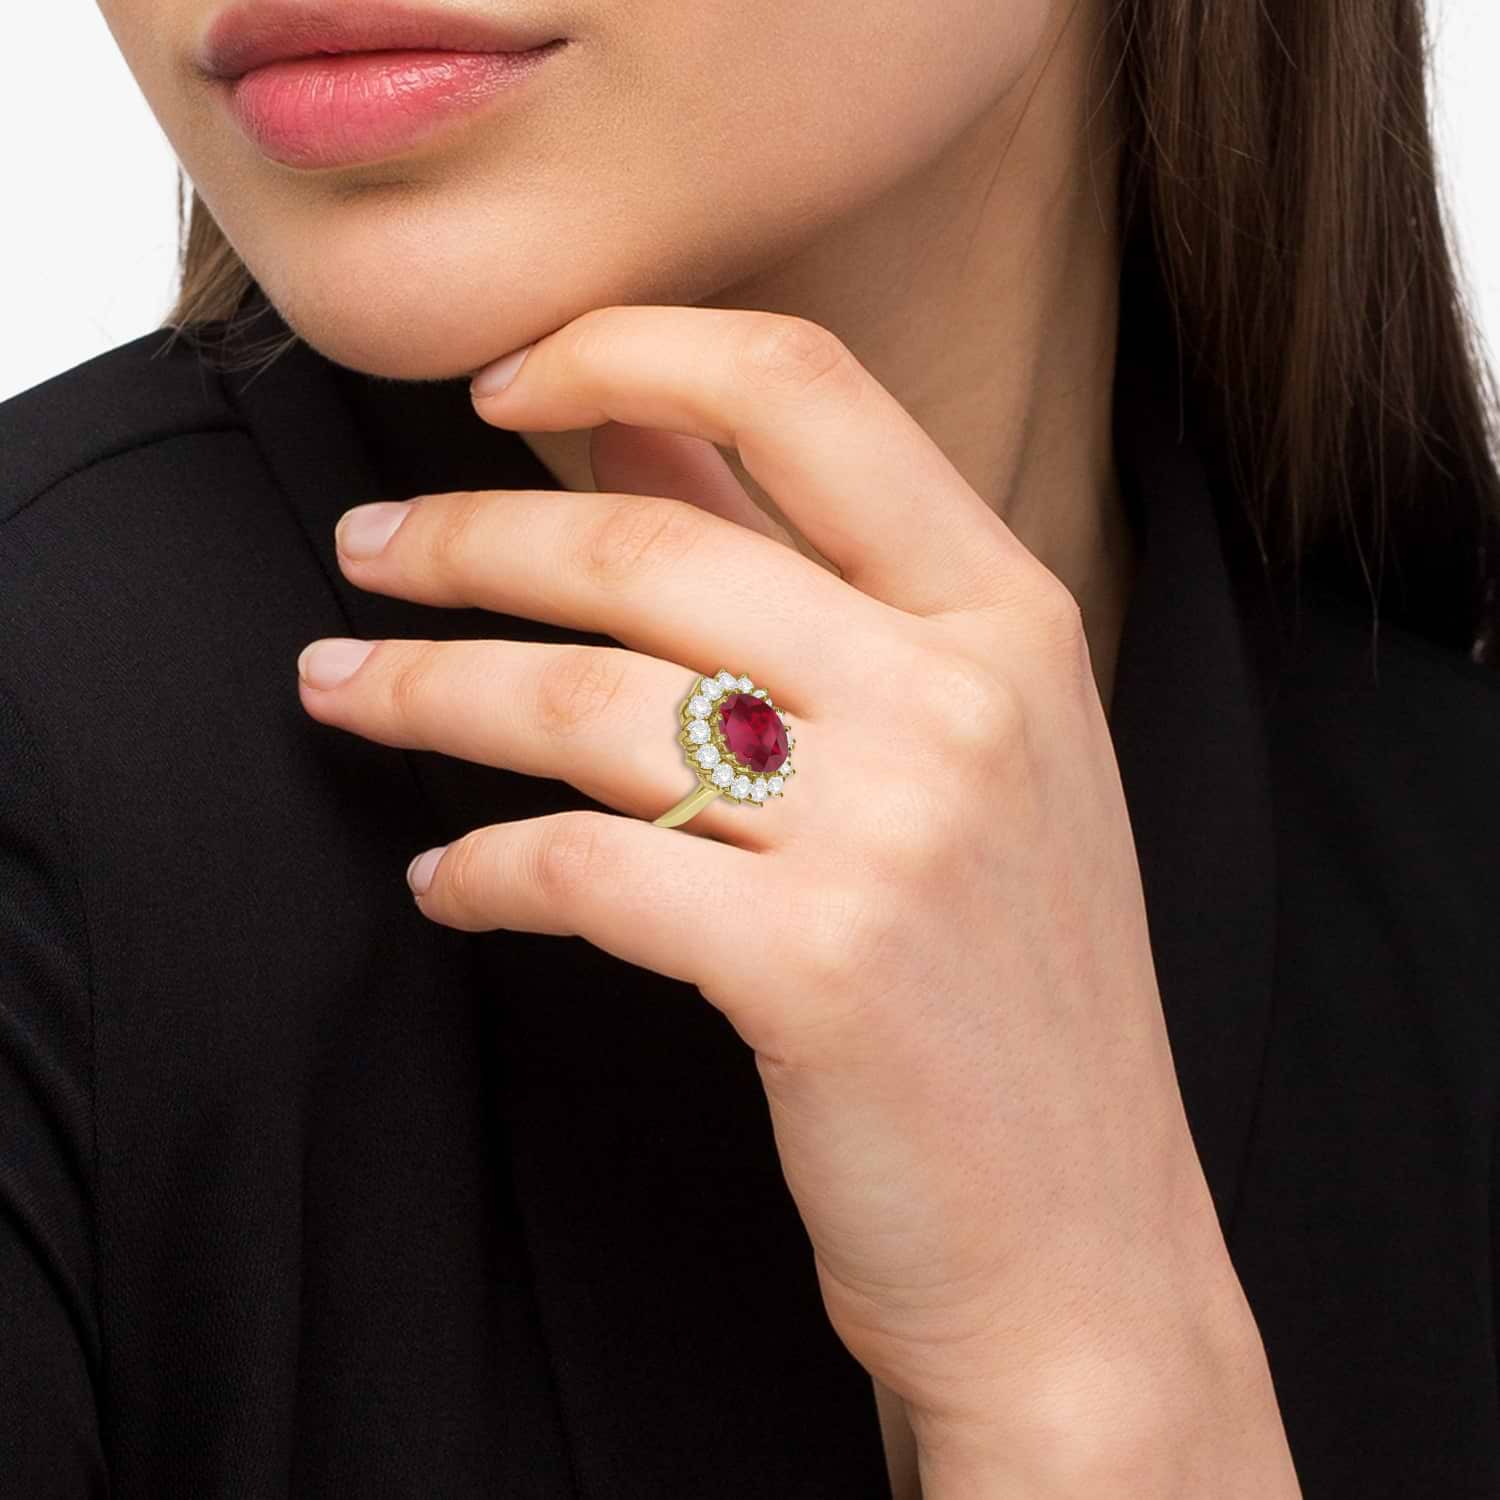 Dainty diamond and ruby rings | Handcrafted fine jewelry, Dainty gold  jewelry, Gold jewellery india